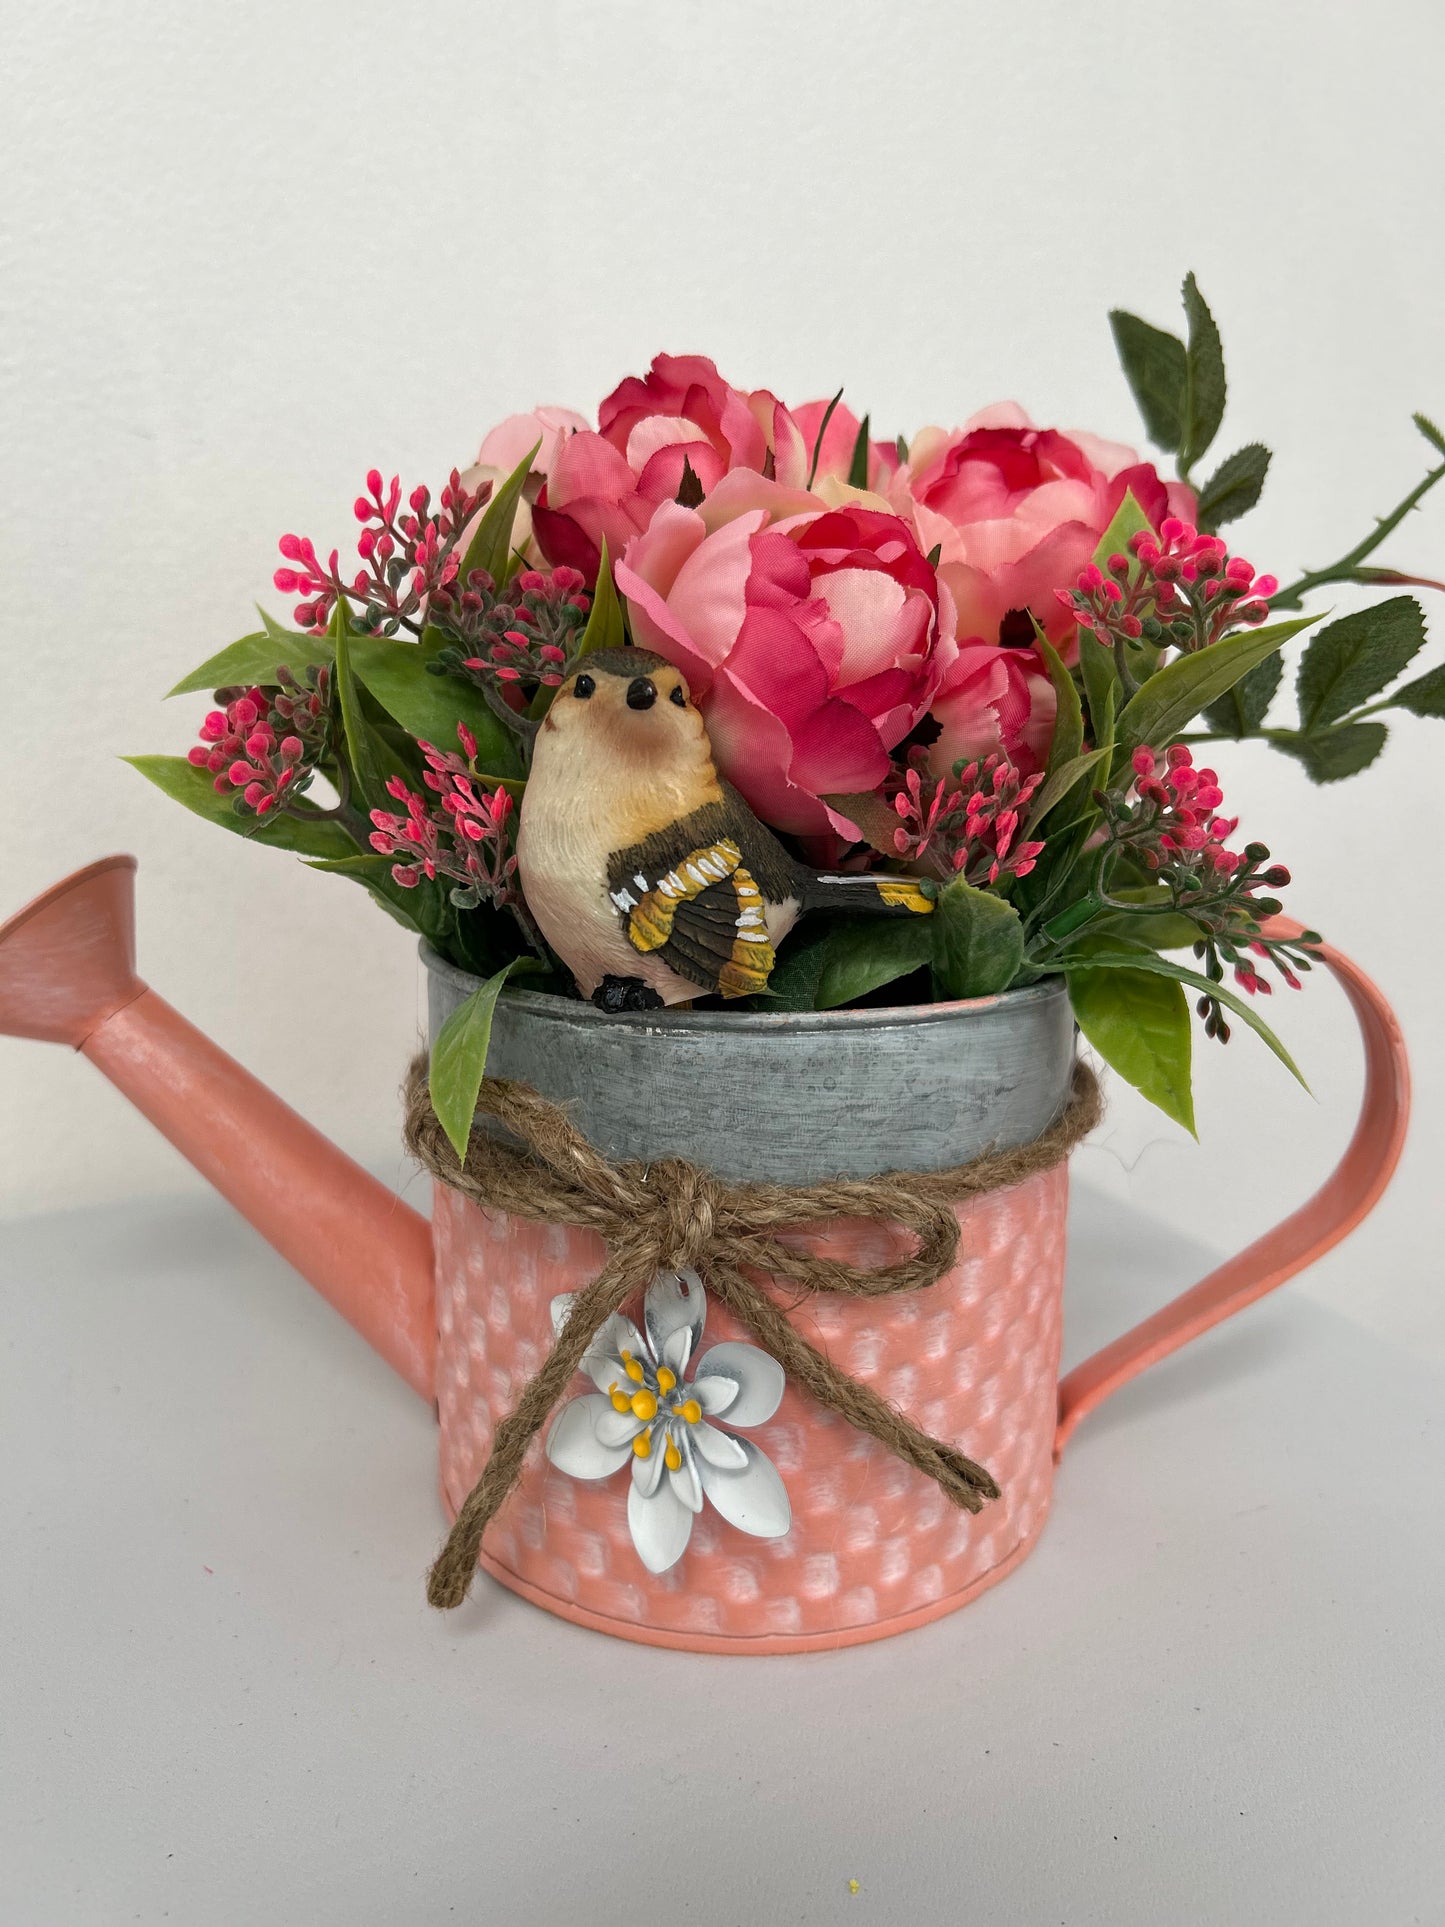 Coral Watering Can filled with artificial flowers and bird figure